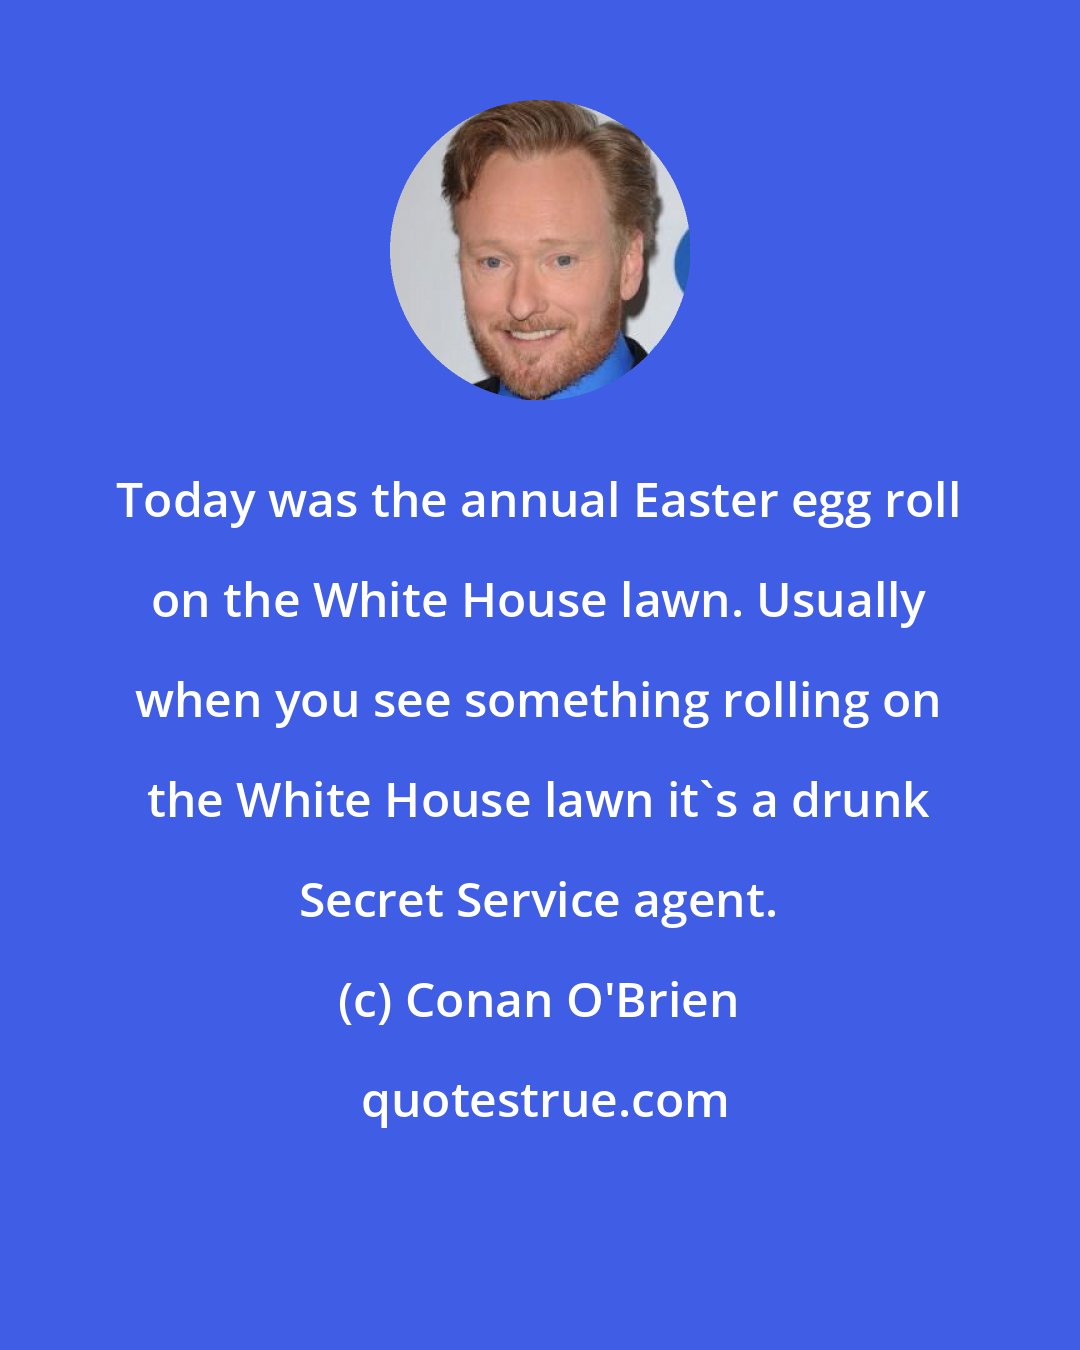 Conan O'Brien: Today was the annual Easter egg roll on the White House lawn. Usually when you see something rolling on the White House lawn it's a drunk Secret Service agent.